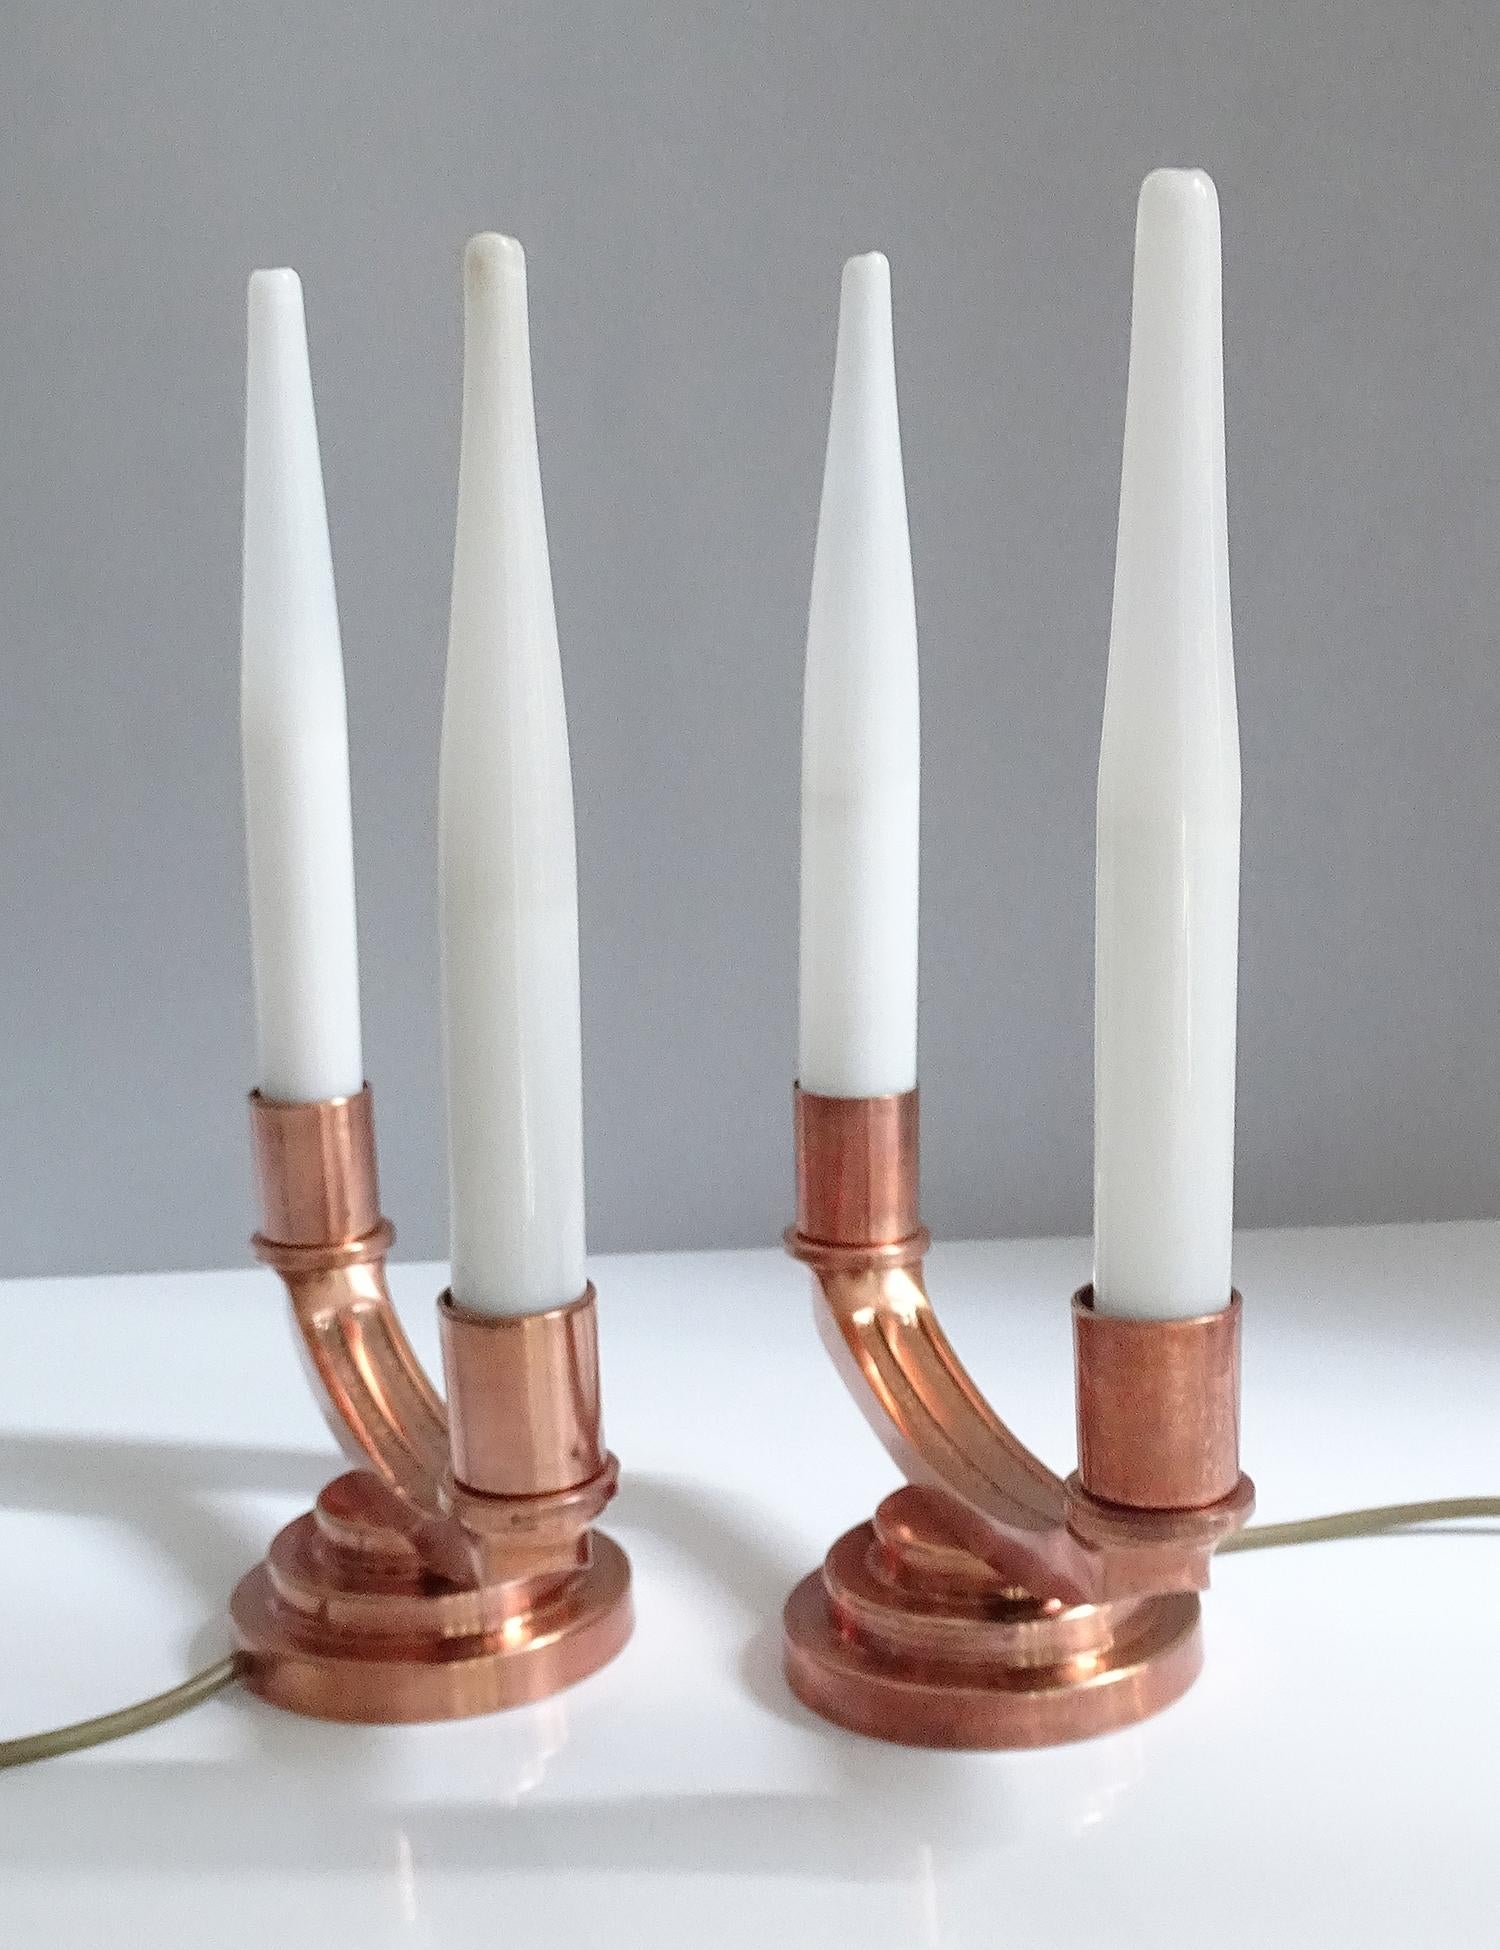 Pair of French Art Deco Modernist Uplighter  Lamps, Brass Copper Glass  Lights For Sale 3